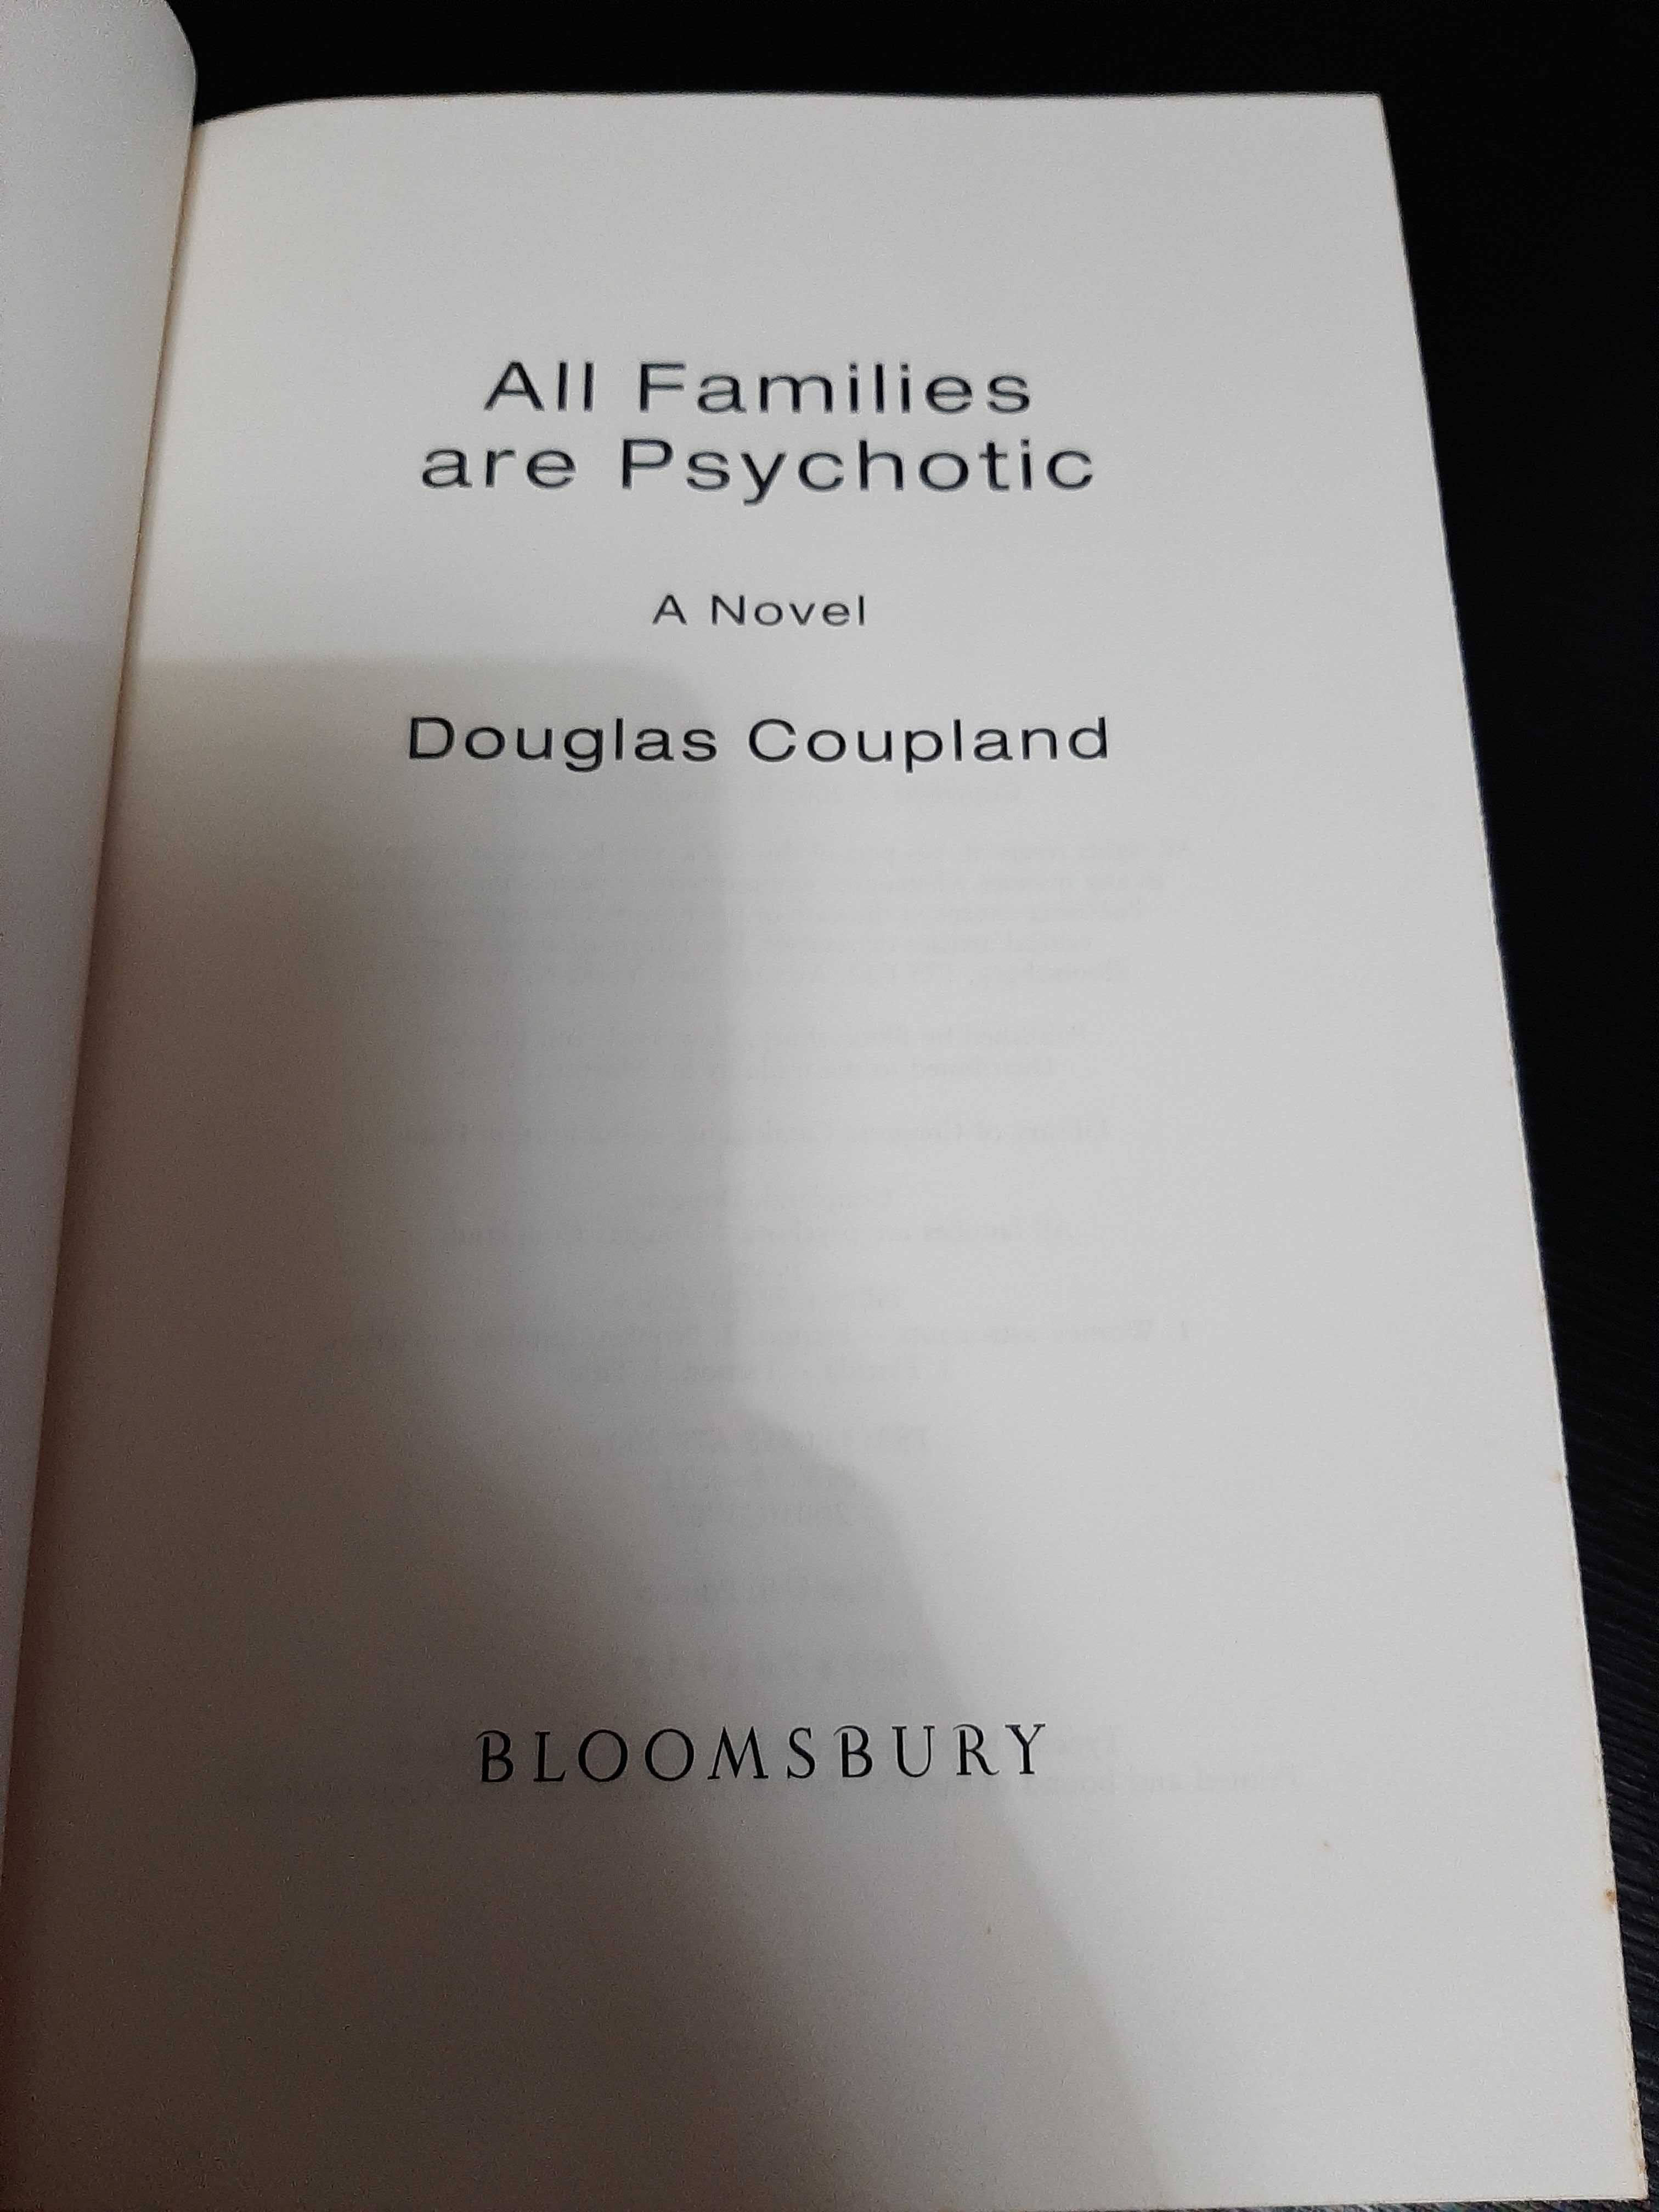 Douglas Coupland – All Families are Psychotic